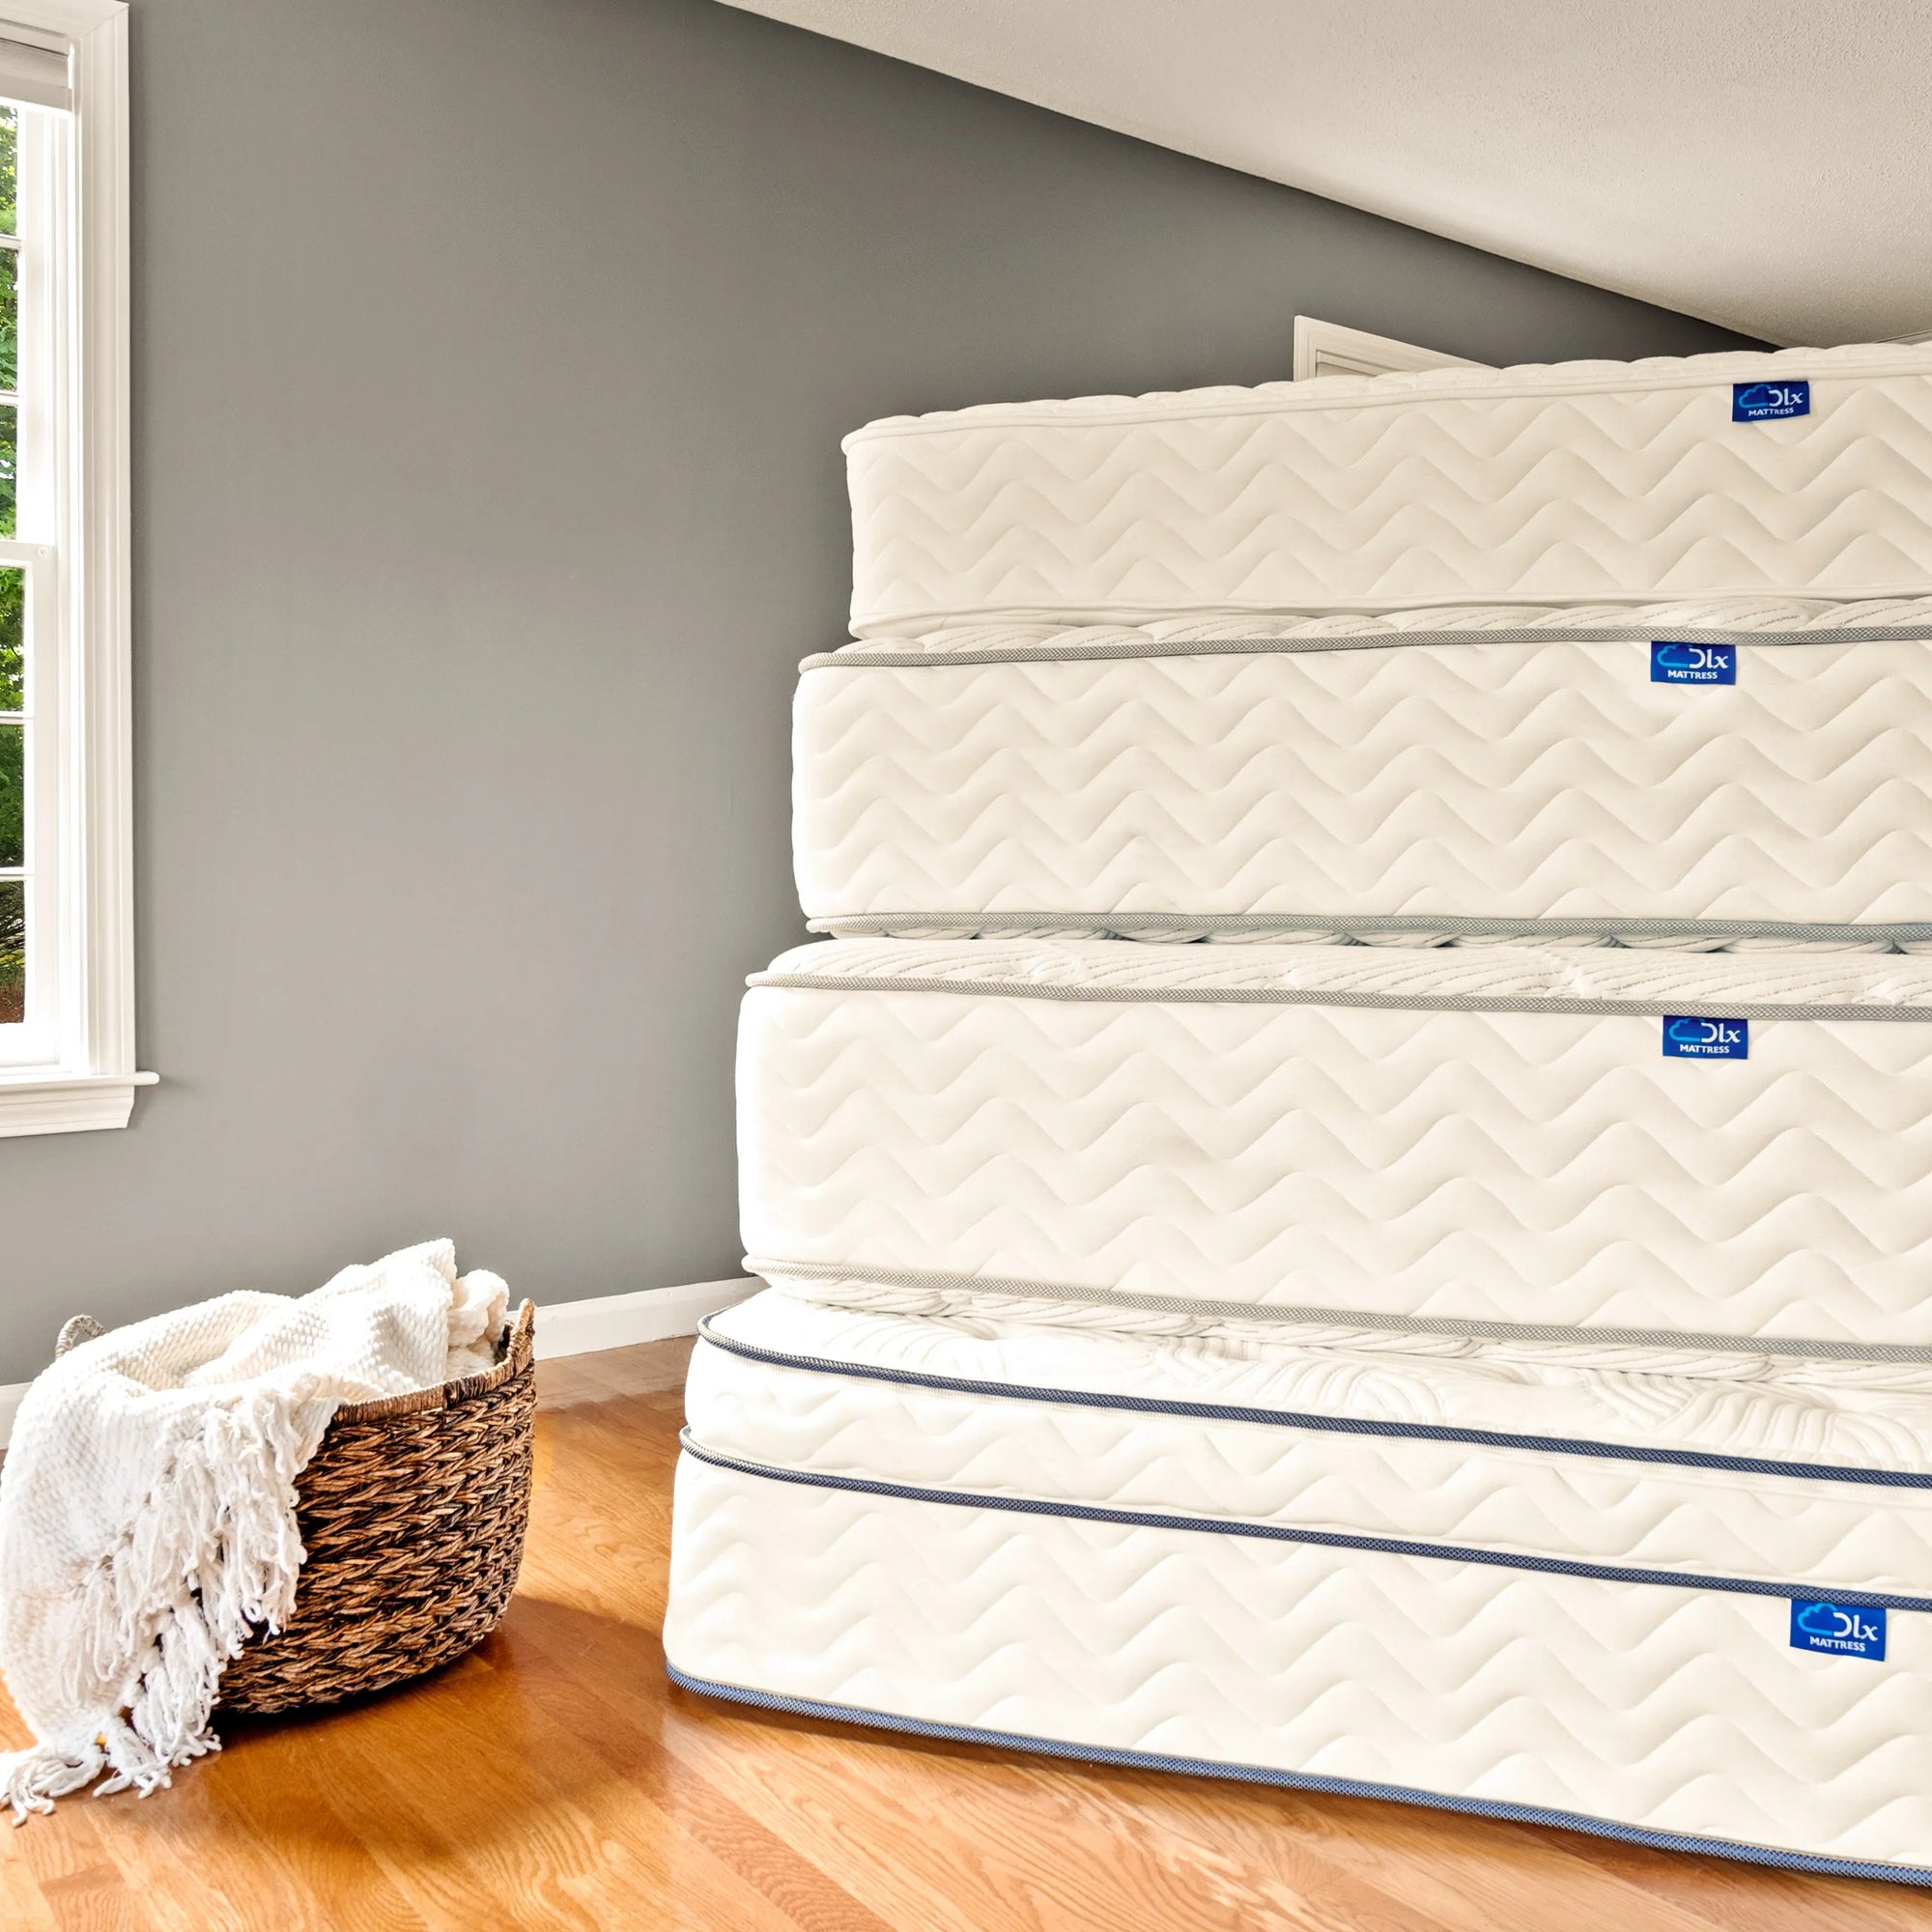 Stack of DLX mattresses representing commitment to quality and lifetime assurance